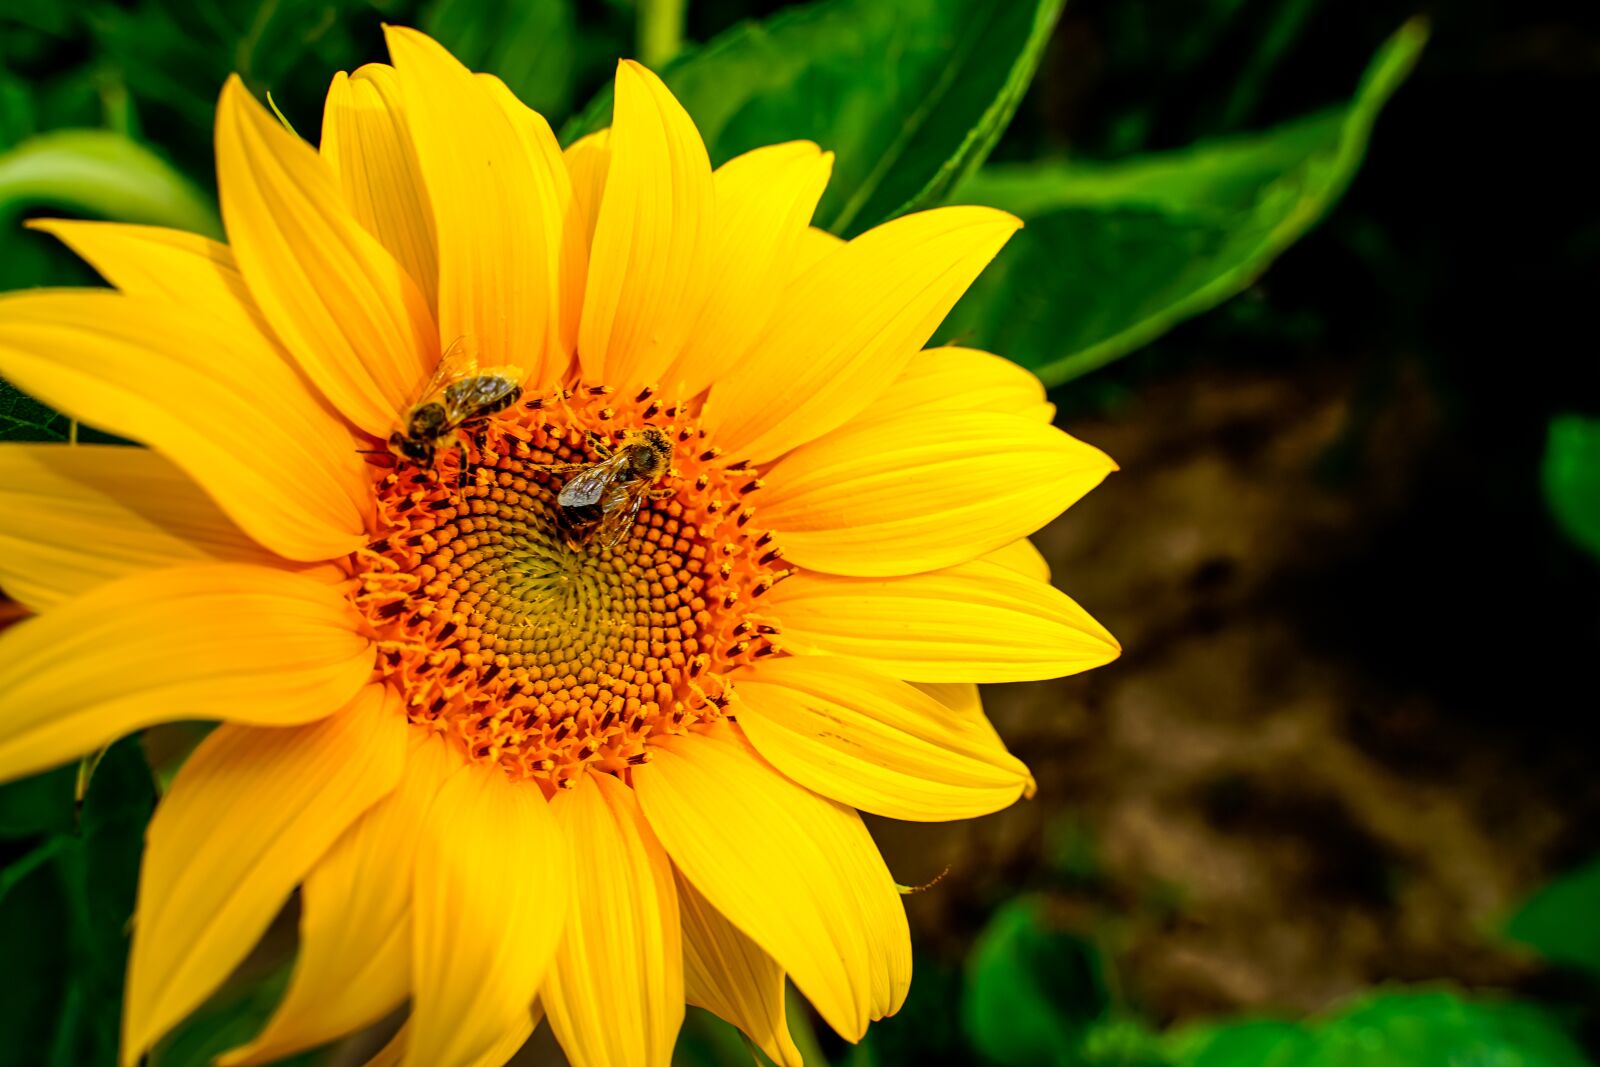 Sony a7 II + Tamron 28-75mm F2.8 Di III RXD sample photo. Sunflower, bees, summer photography